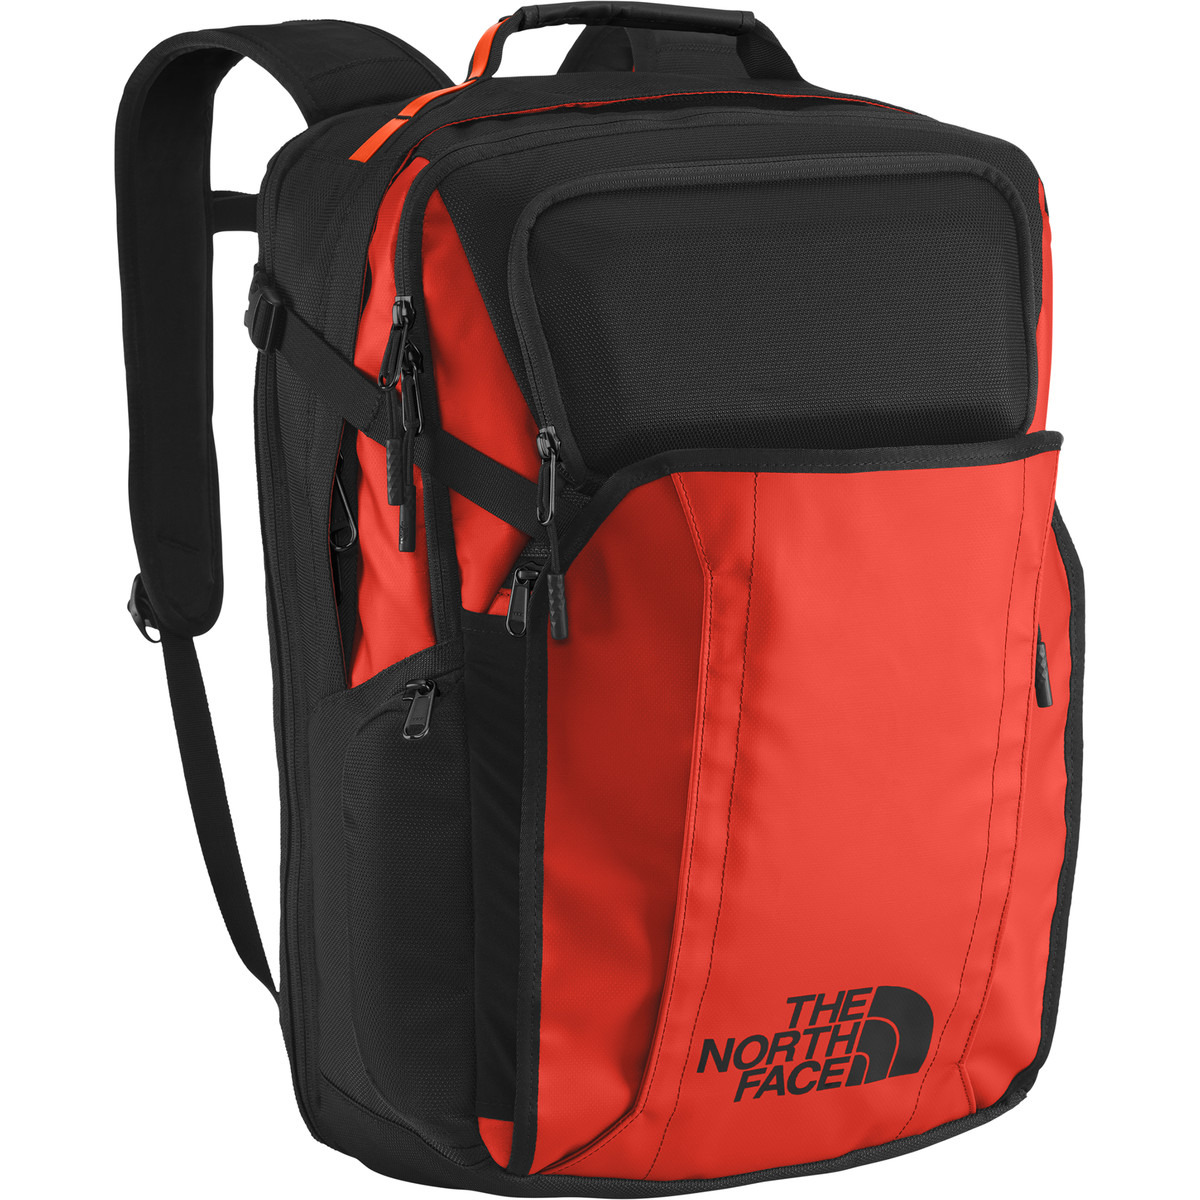 The North Face Wavelength 32L Backpack - Travel